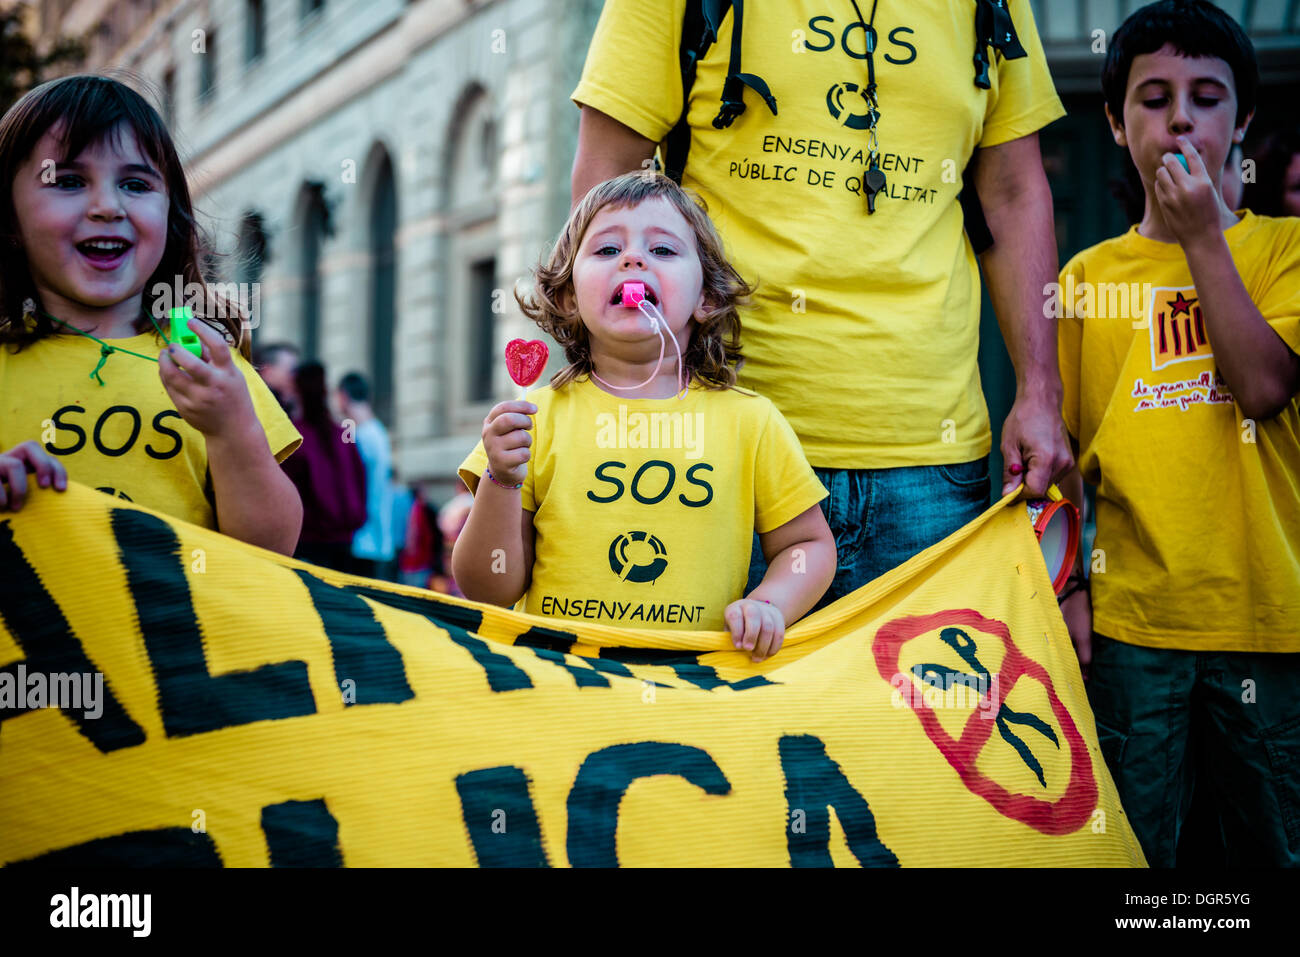 Barcelona, Spain. October 24th, 2013: Little children await a demonstration against austerity measures and the 'law Wert' during a three day long education strike through the city of Barcelona. © matthi/Alamy Live News Stock Photo